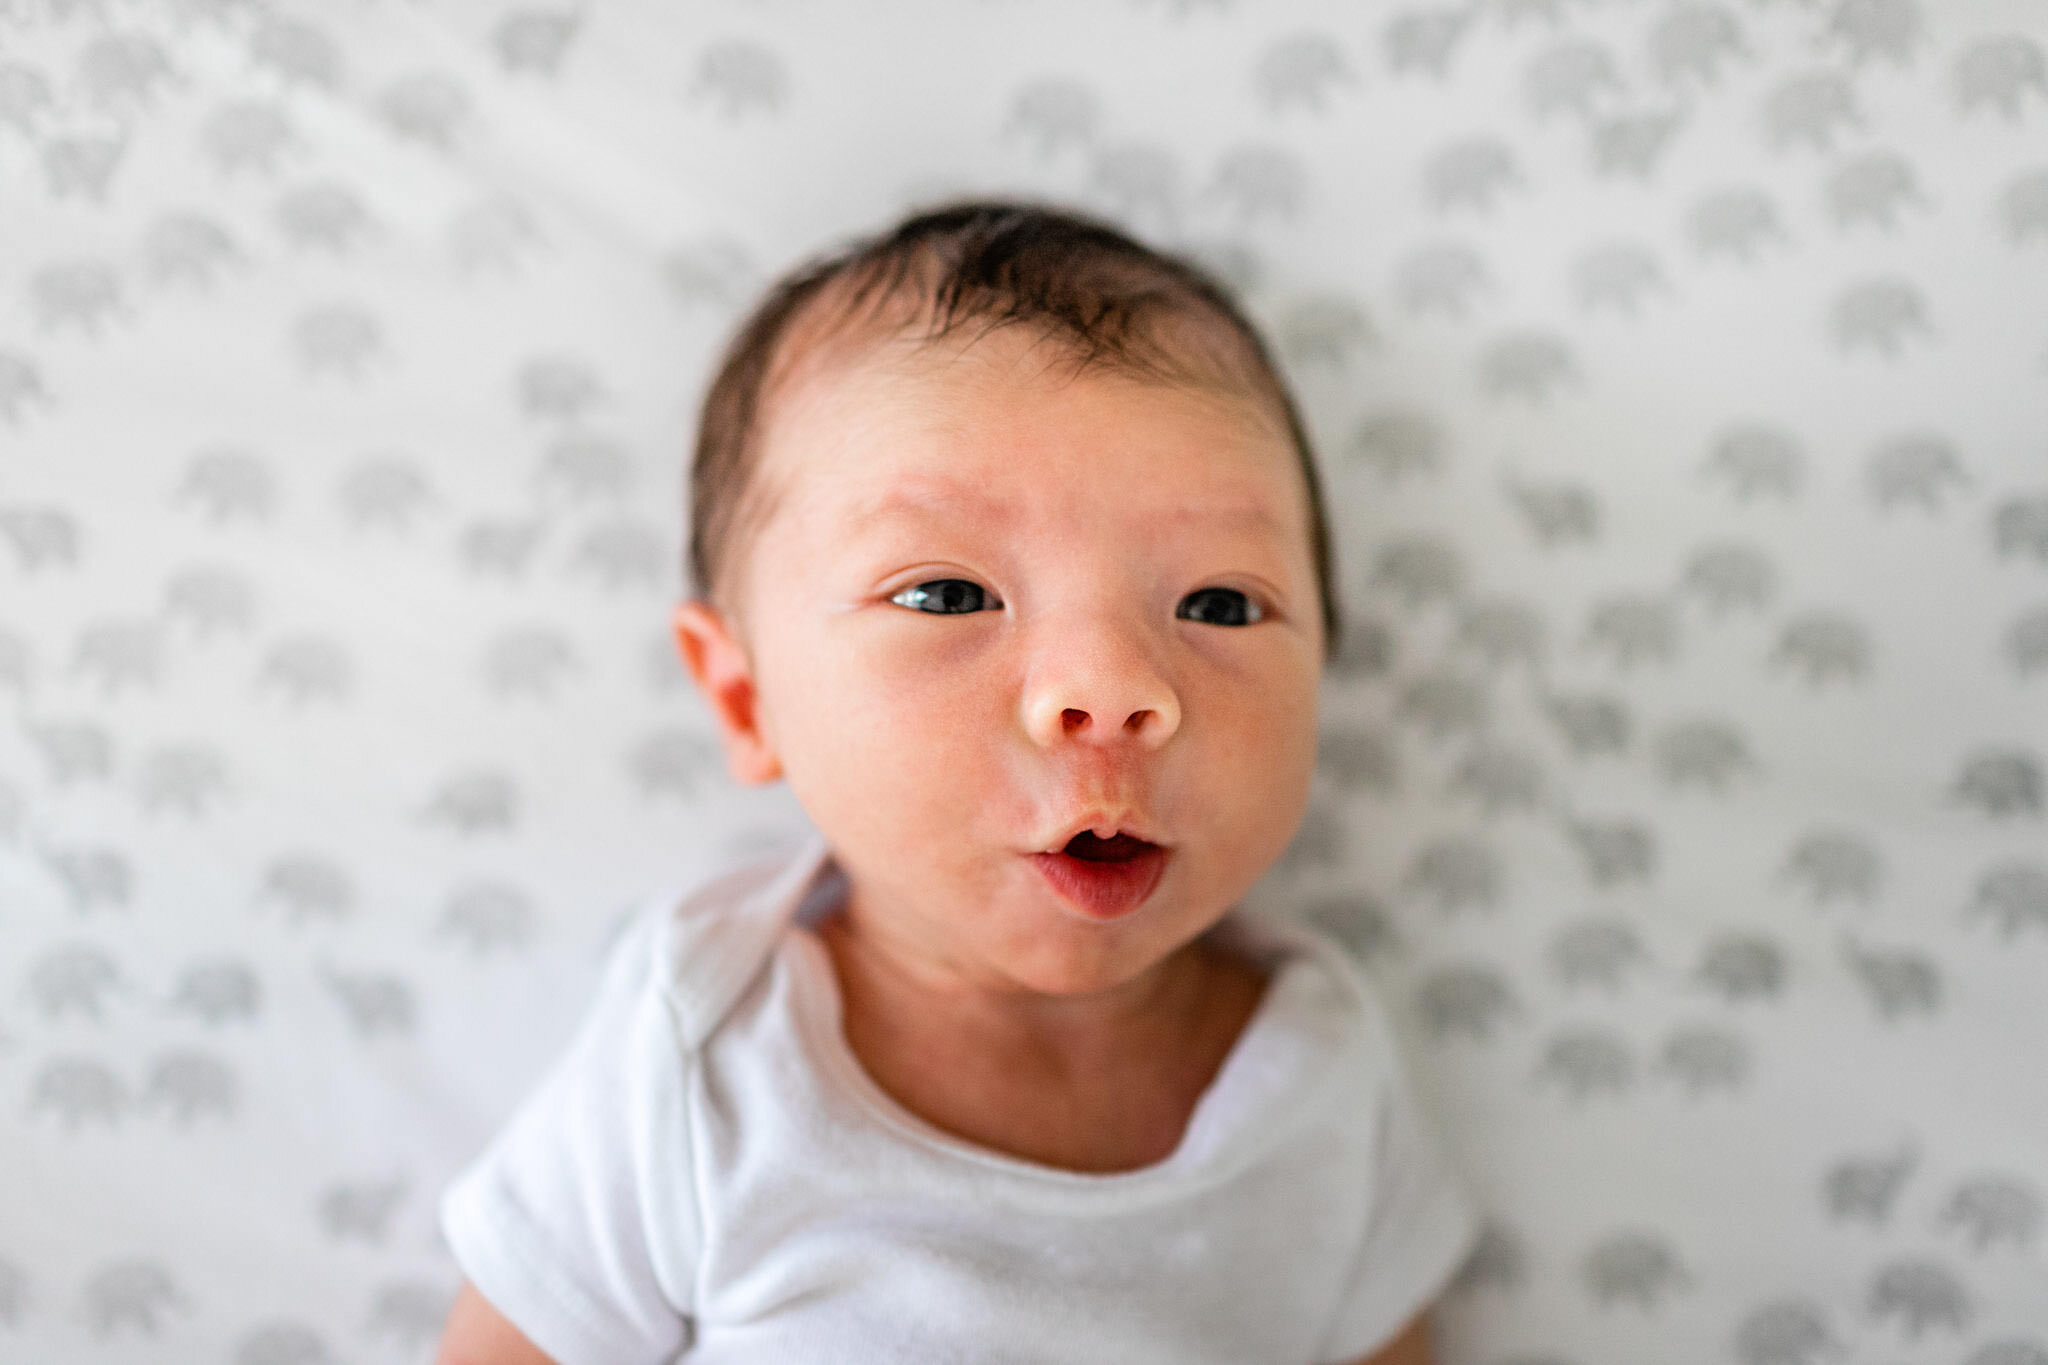 Baby making cute and funny expression | Durham Newborn Photographer | By G. Lin Photography